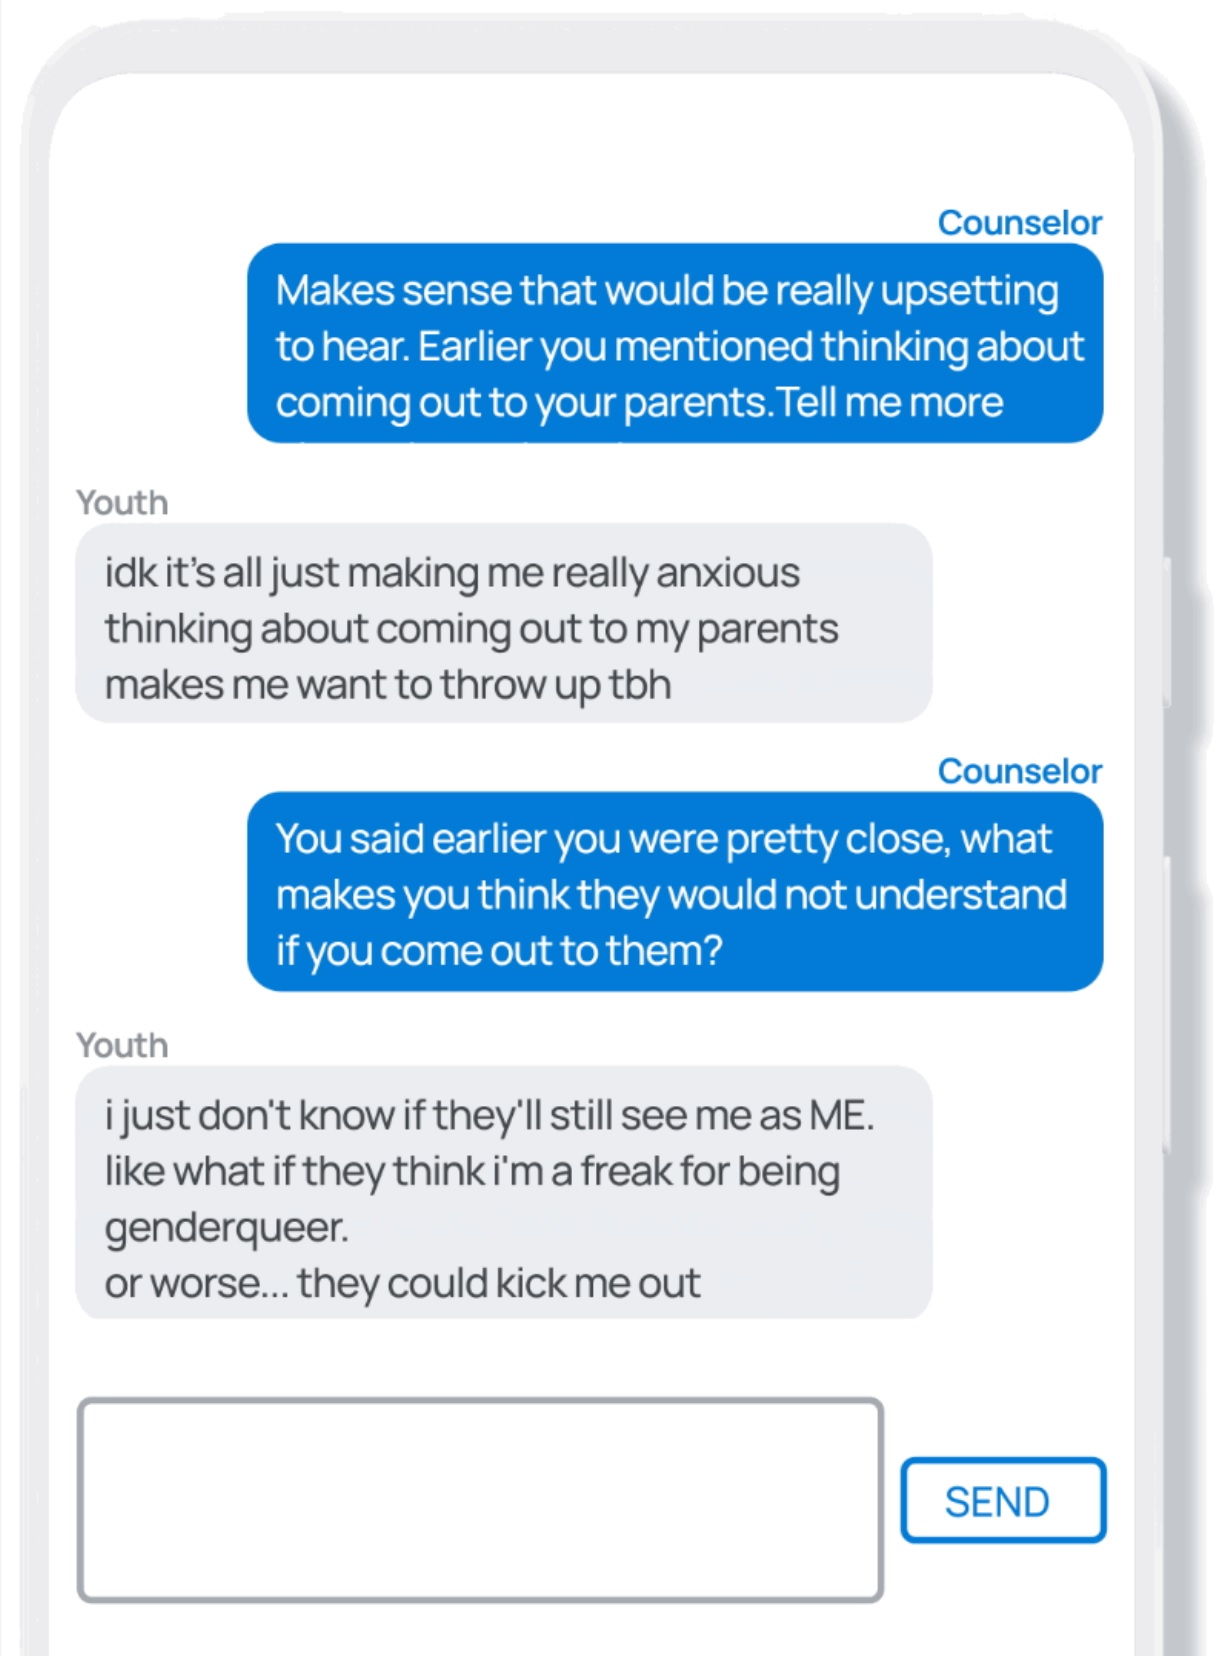 A screenshot of a training interaction between a chatbot and a person